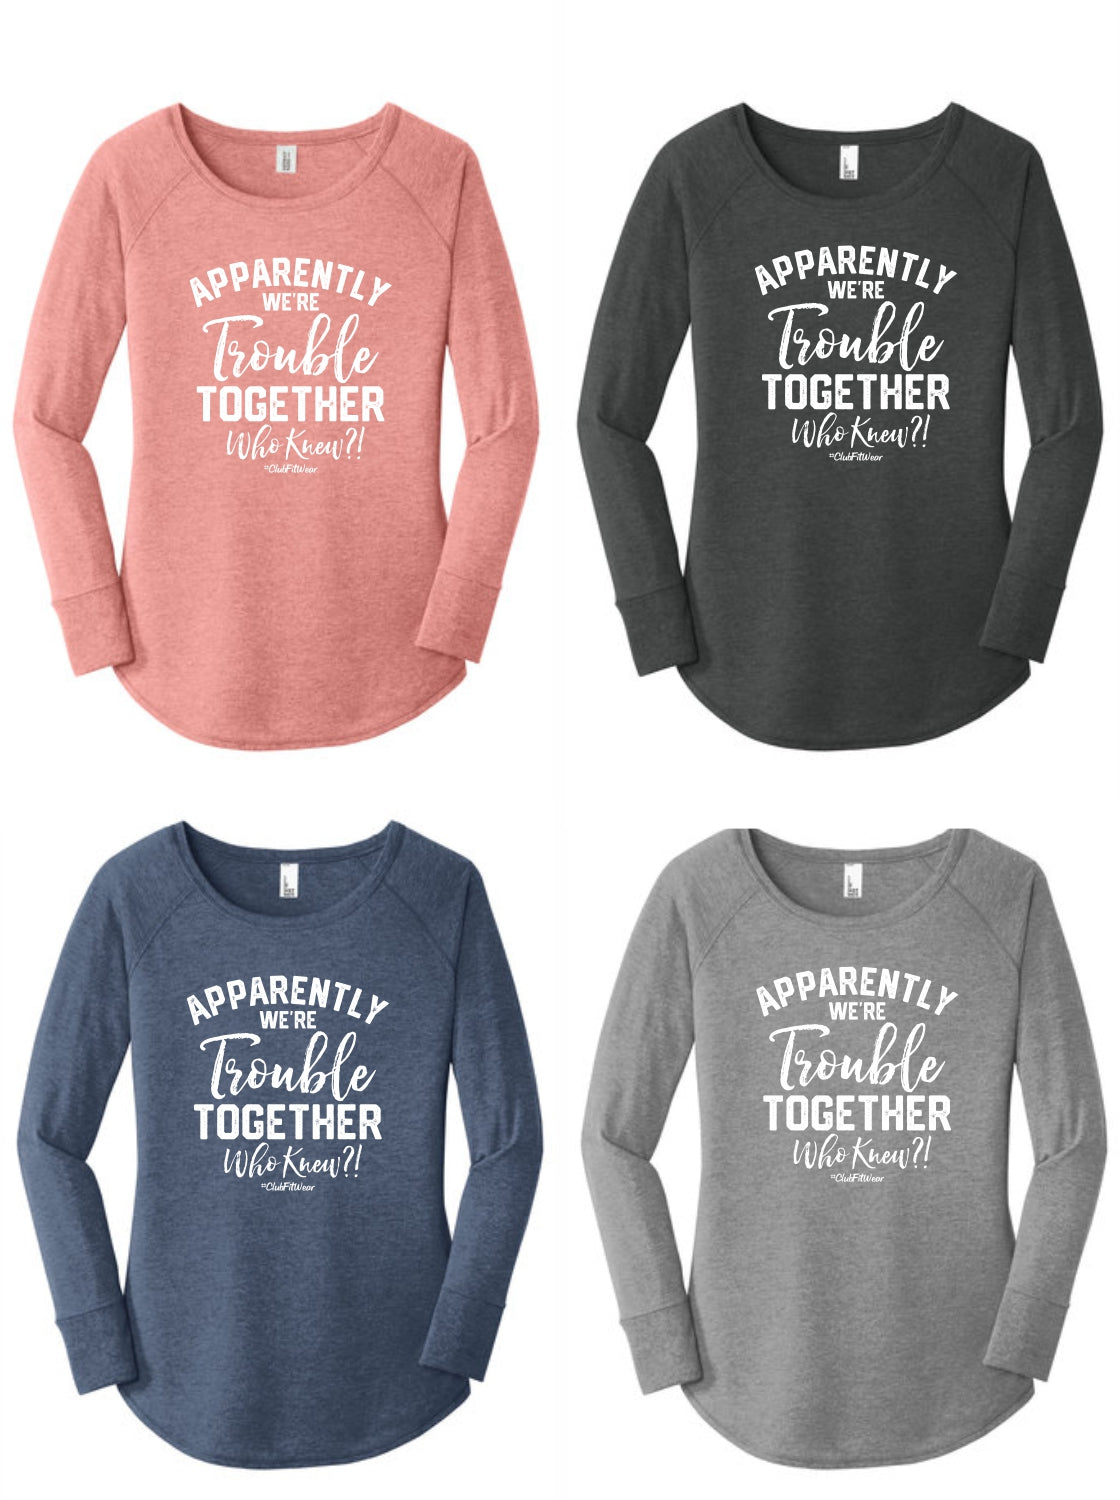 Apparently we're Trouble Together Who Knew?! - Long Sleeve Tunic